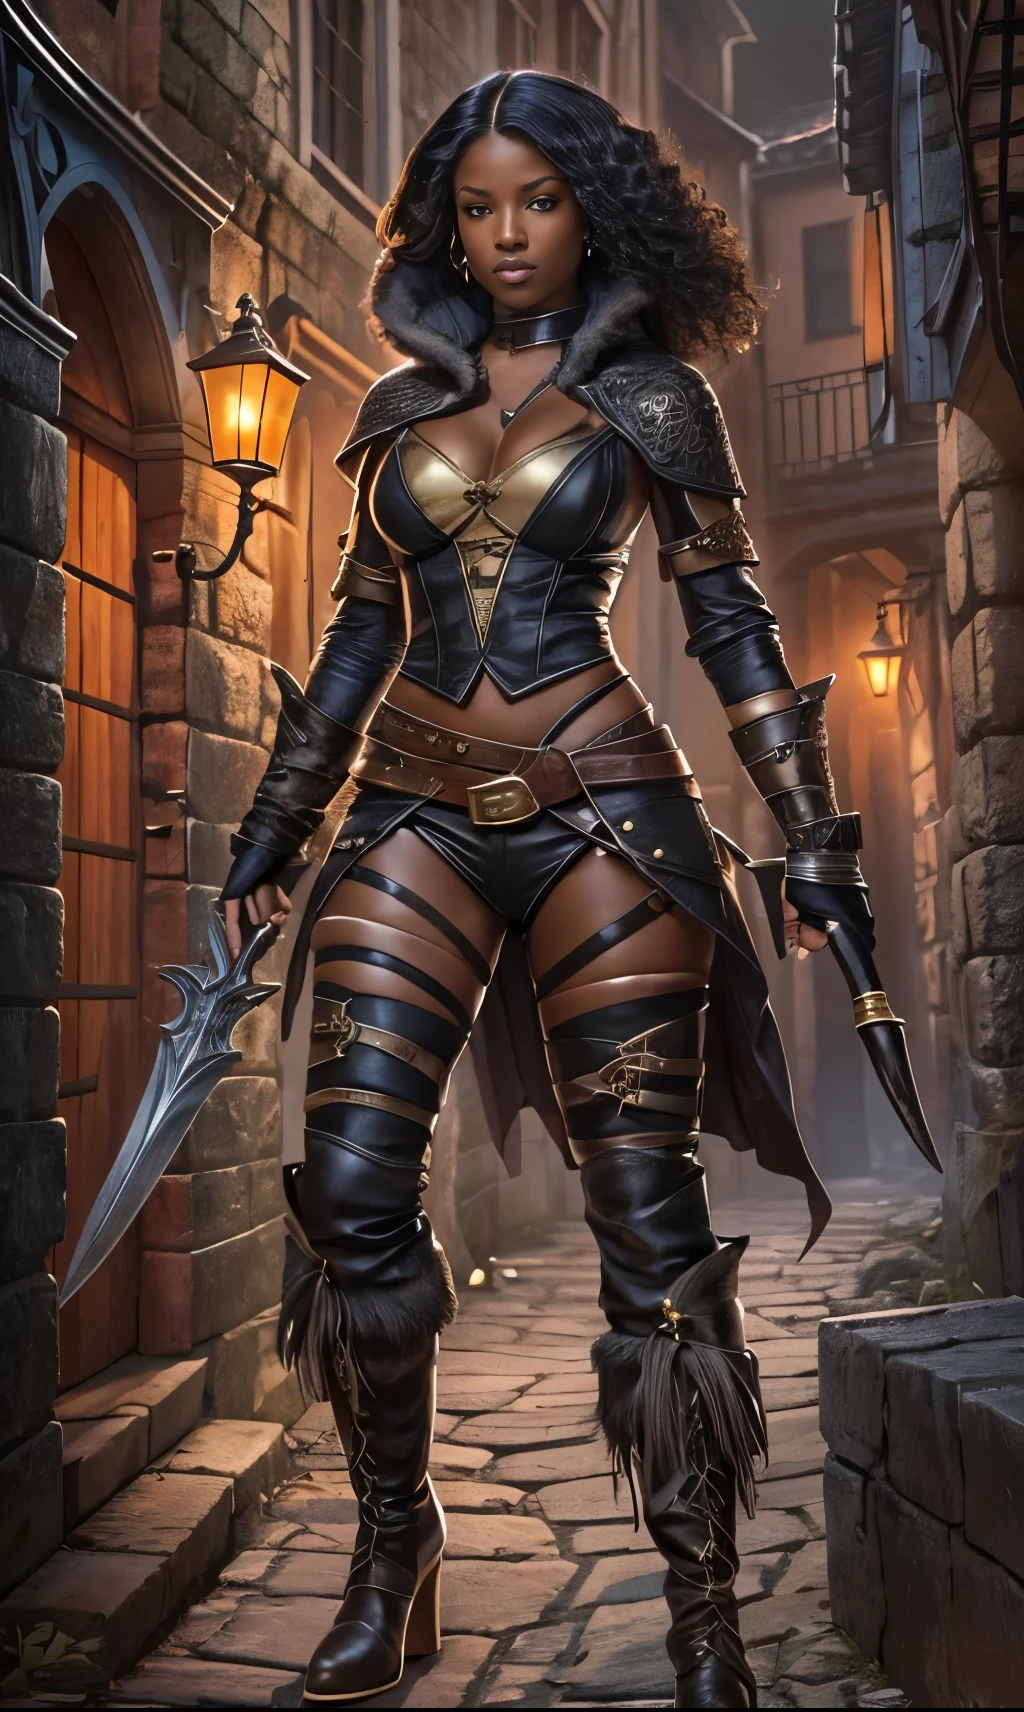 (a detailed female rogue,a black-skinned female rogue,a black skinned female rogue with an intense expression)black female rogue,sneaking through an alley in a medieval town,leather armor with a skimpy design,showing a hint of sensuality,black patterned pantyhose,curly black hair,flowing and vibrant,holding a leather whip in one hand as a weapon,"high-heeled leather boots",giving her an agile and dangerous aura,medieval-themed alley,with dim and flickering lanterns casting a mysterious and eerie light,ancient architecture towering on both sides of the alley,adding a sense of history and atmosphere